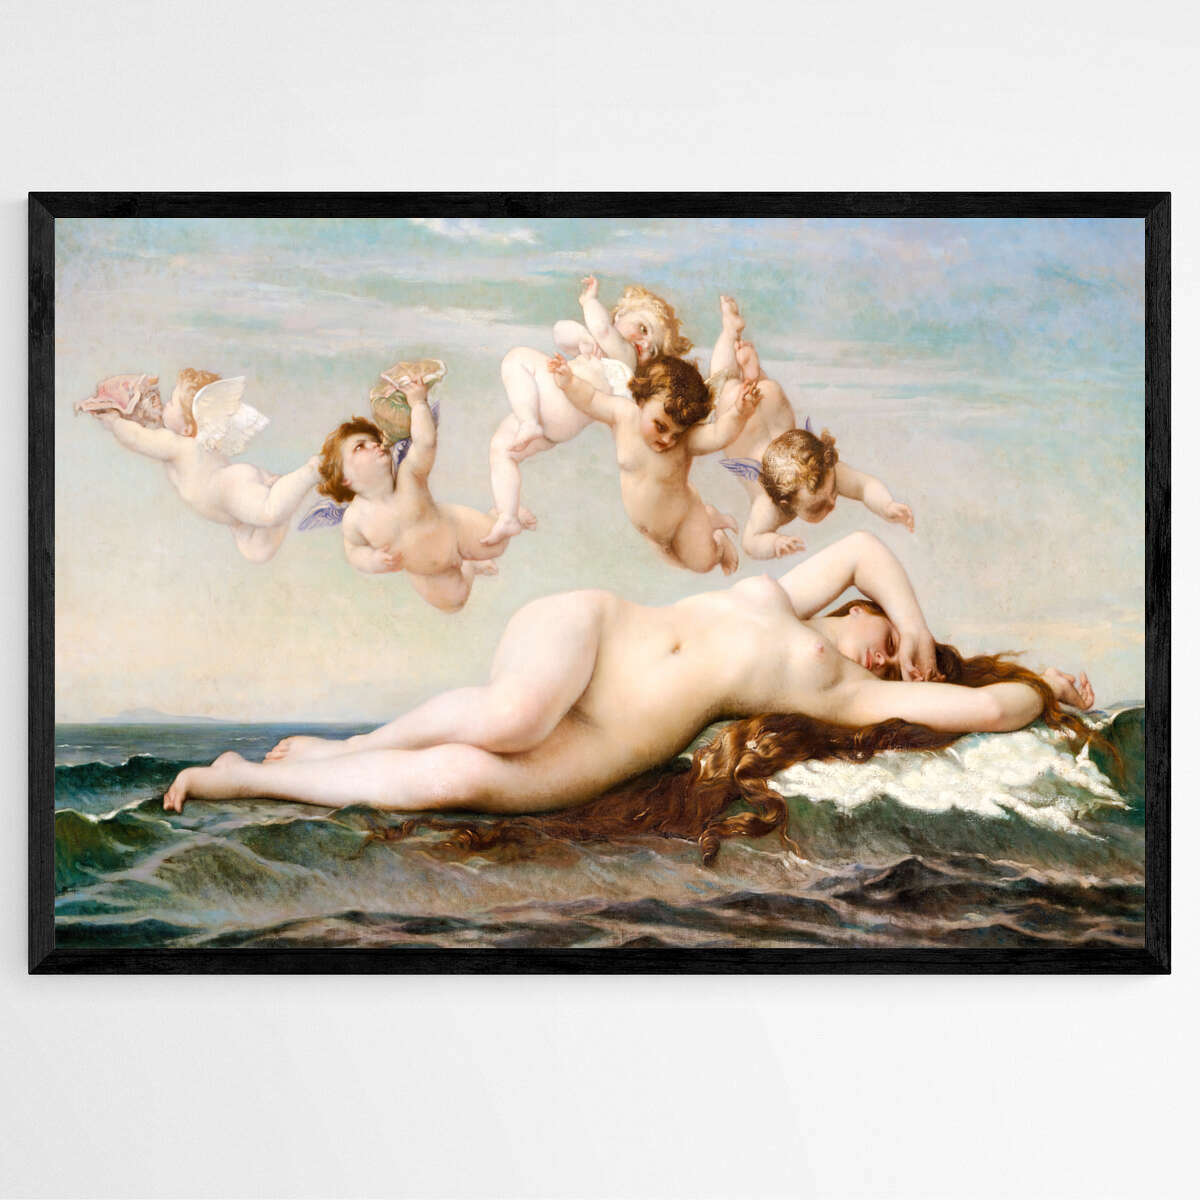 The Birth of Venus by Alexandre Cabanel. | Famous Paintings Wall Art Prints - The Canvas Hive